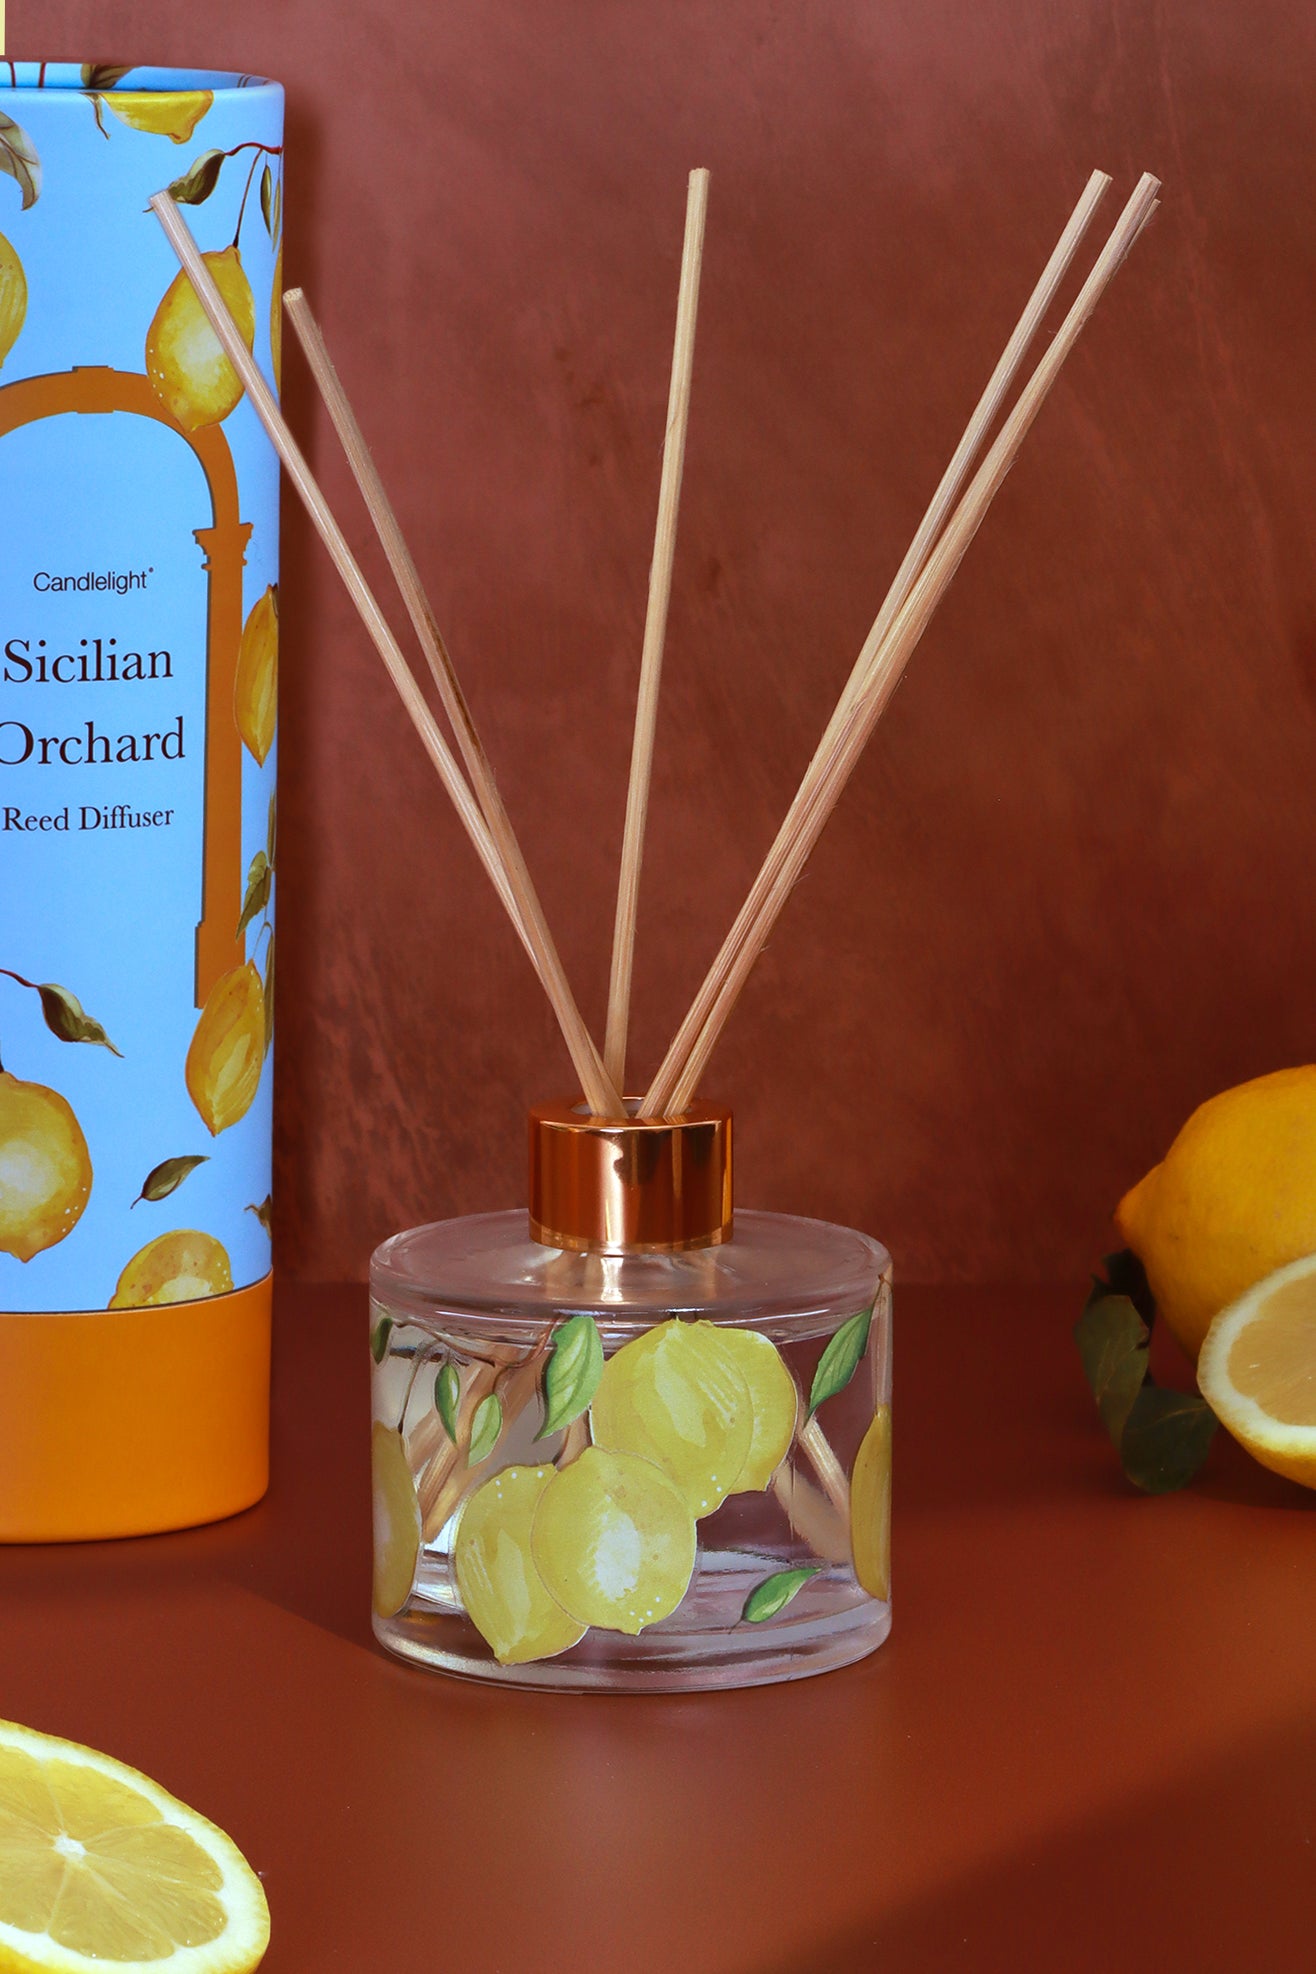 Sicilian Orchard Scented Reed Diffuser with Gift Box